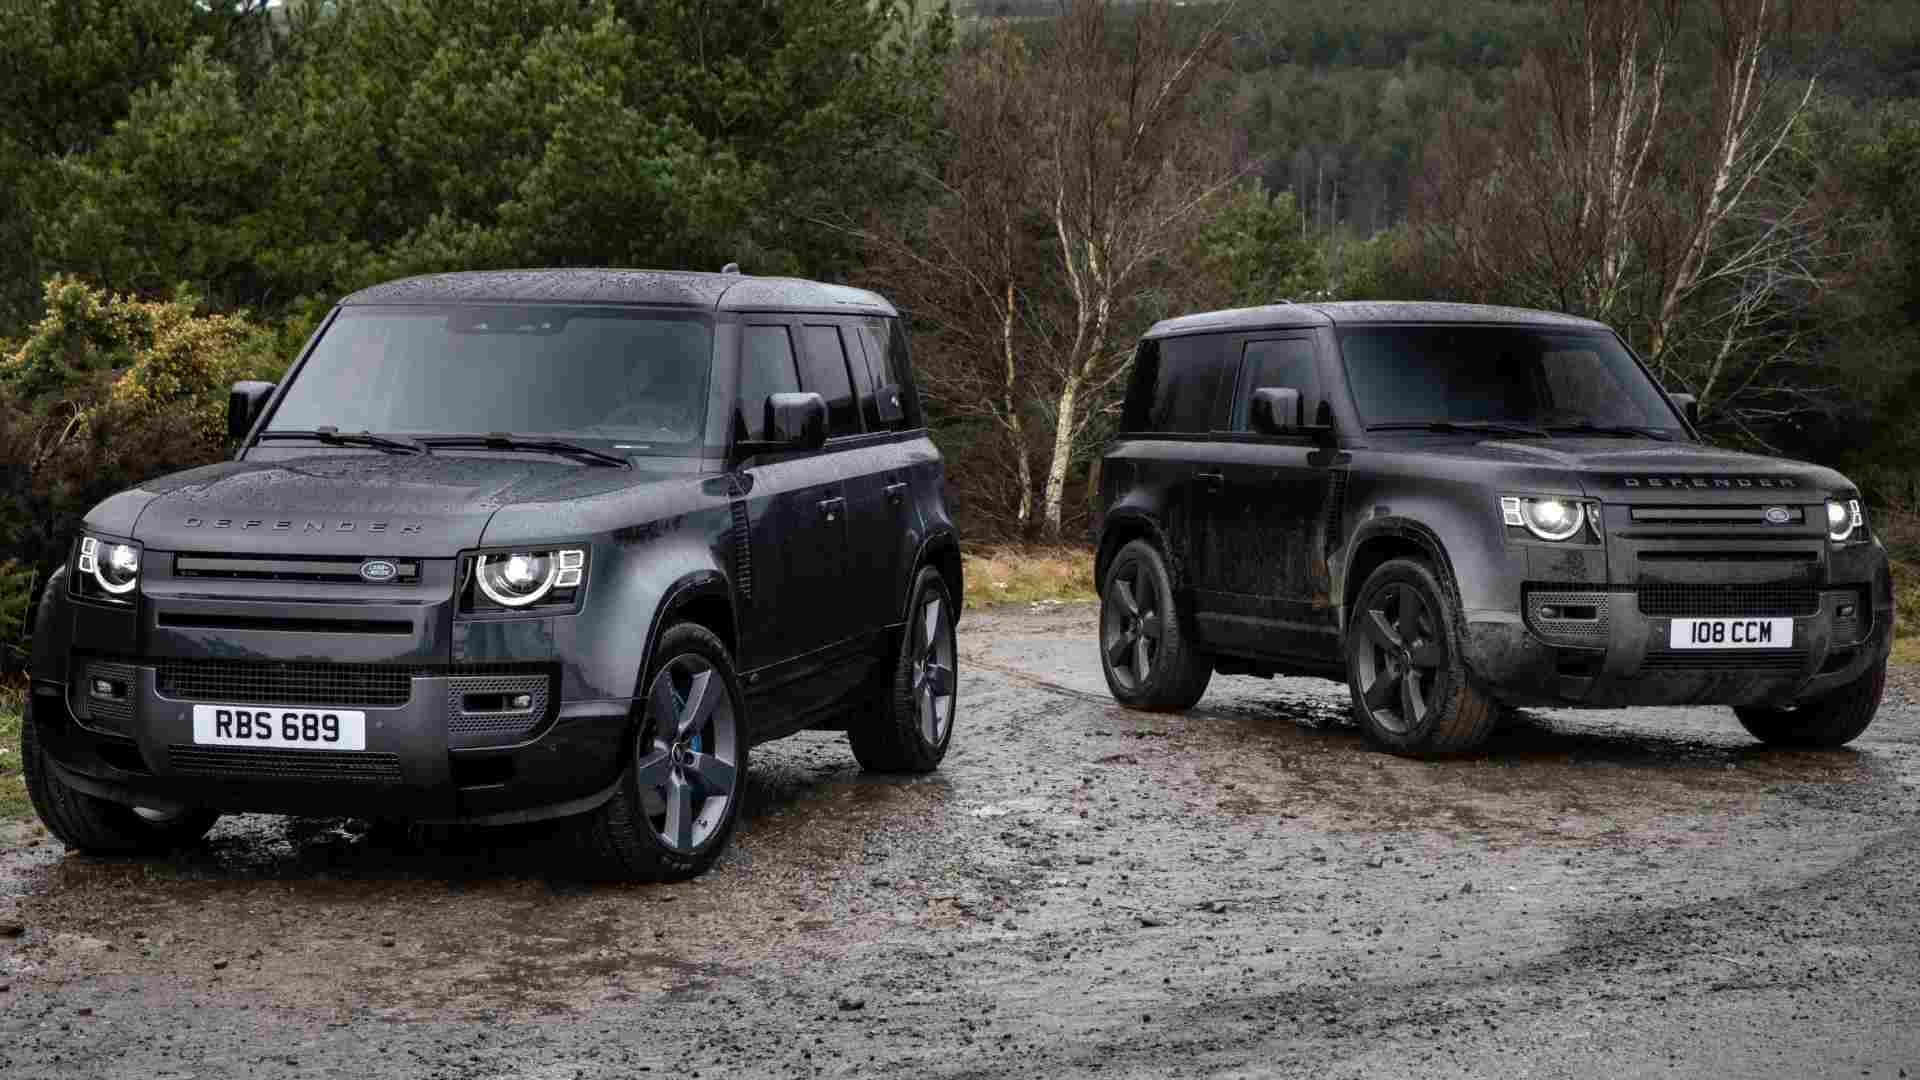 The 5.0-litre V8 engine will be available with both 90 and 110 body styles of the Land Rover Defender. Image: Land Rover